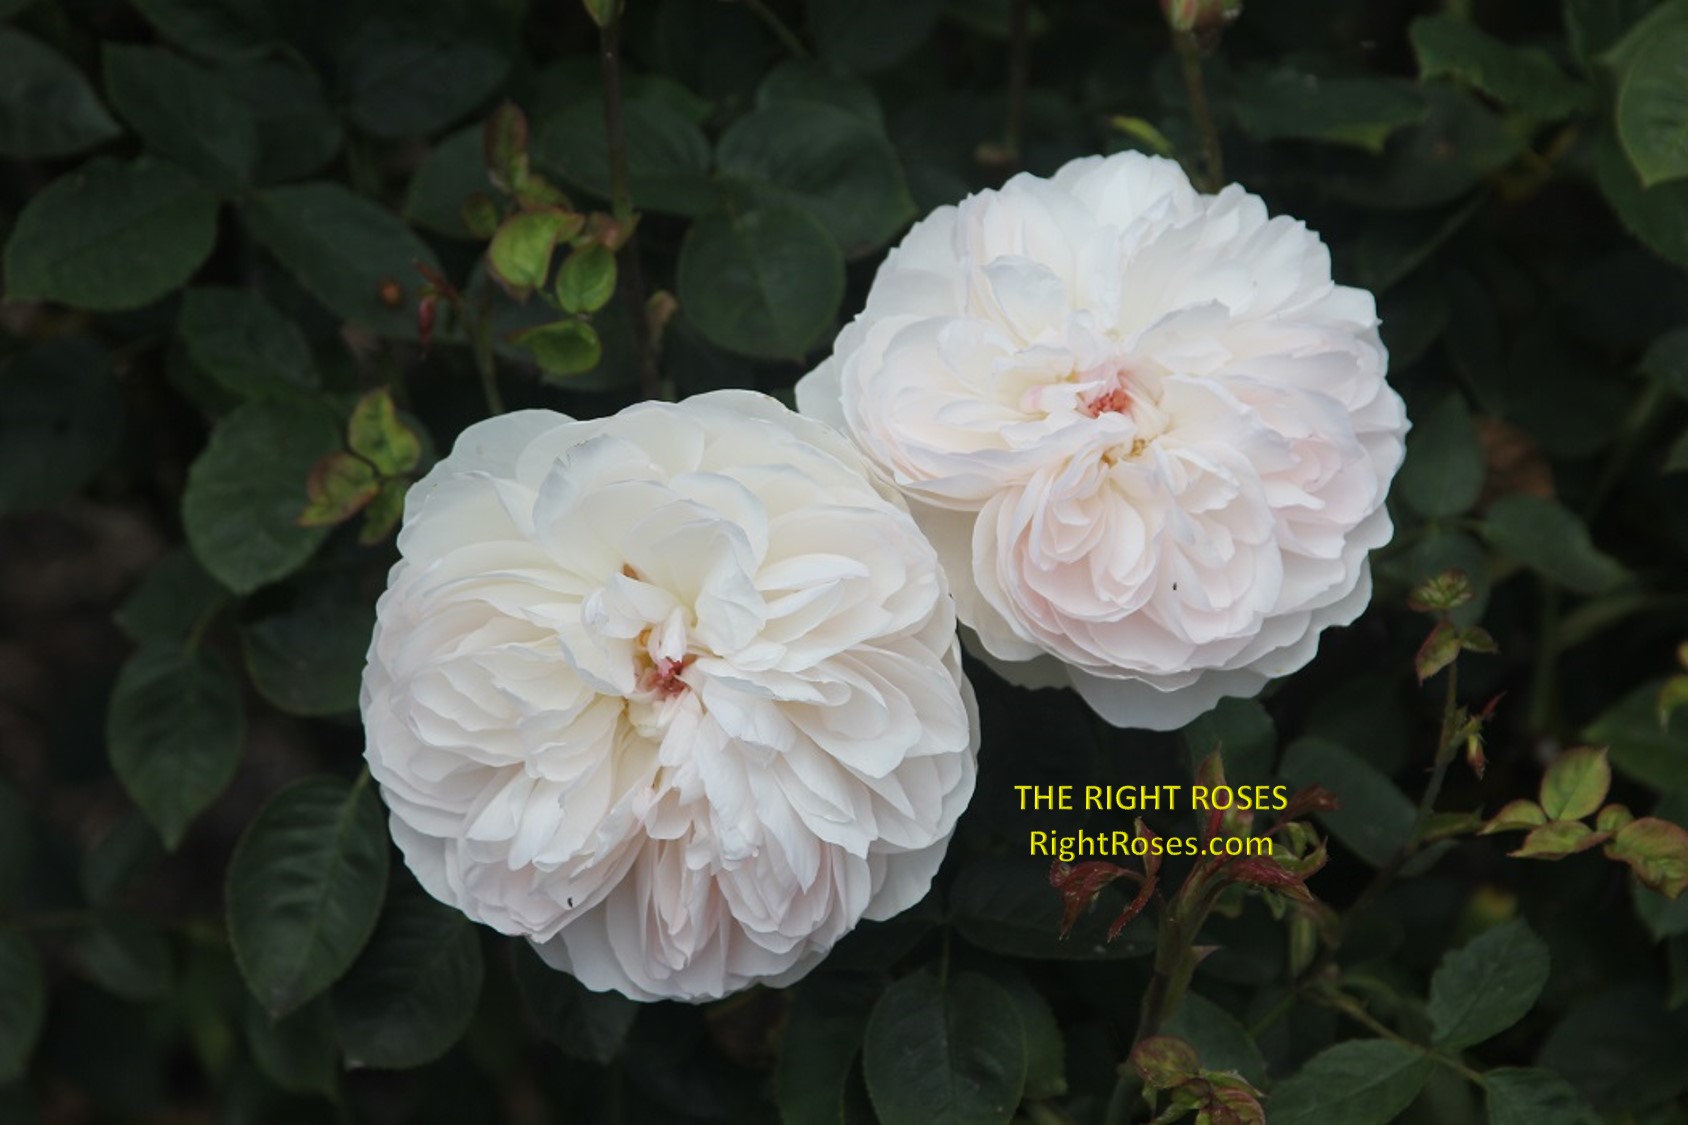 Gentle Hermione rose review the right roses score best top garden store david austin english roses rose products rose rating the right leap rose food fertilizer